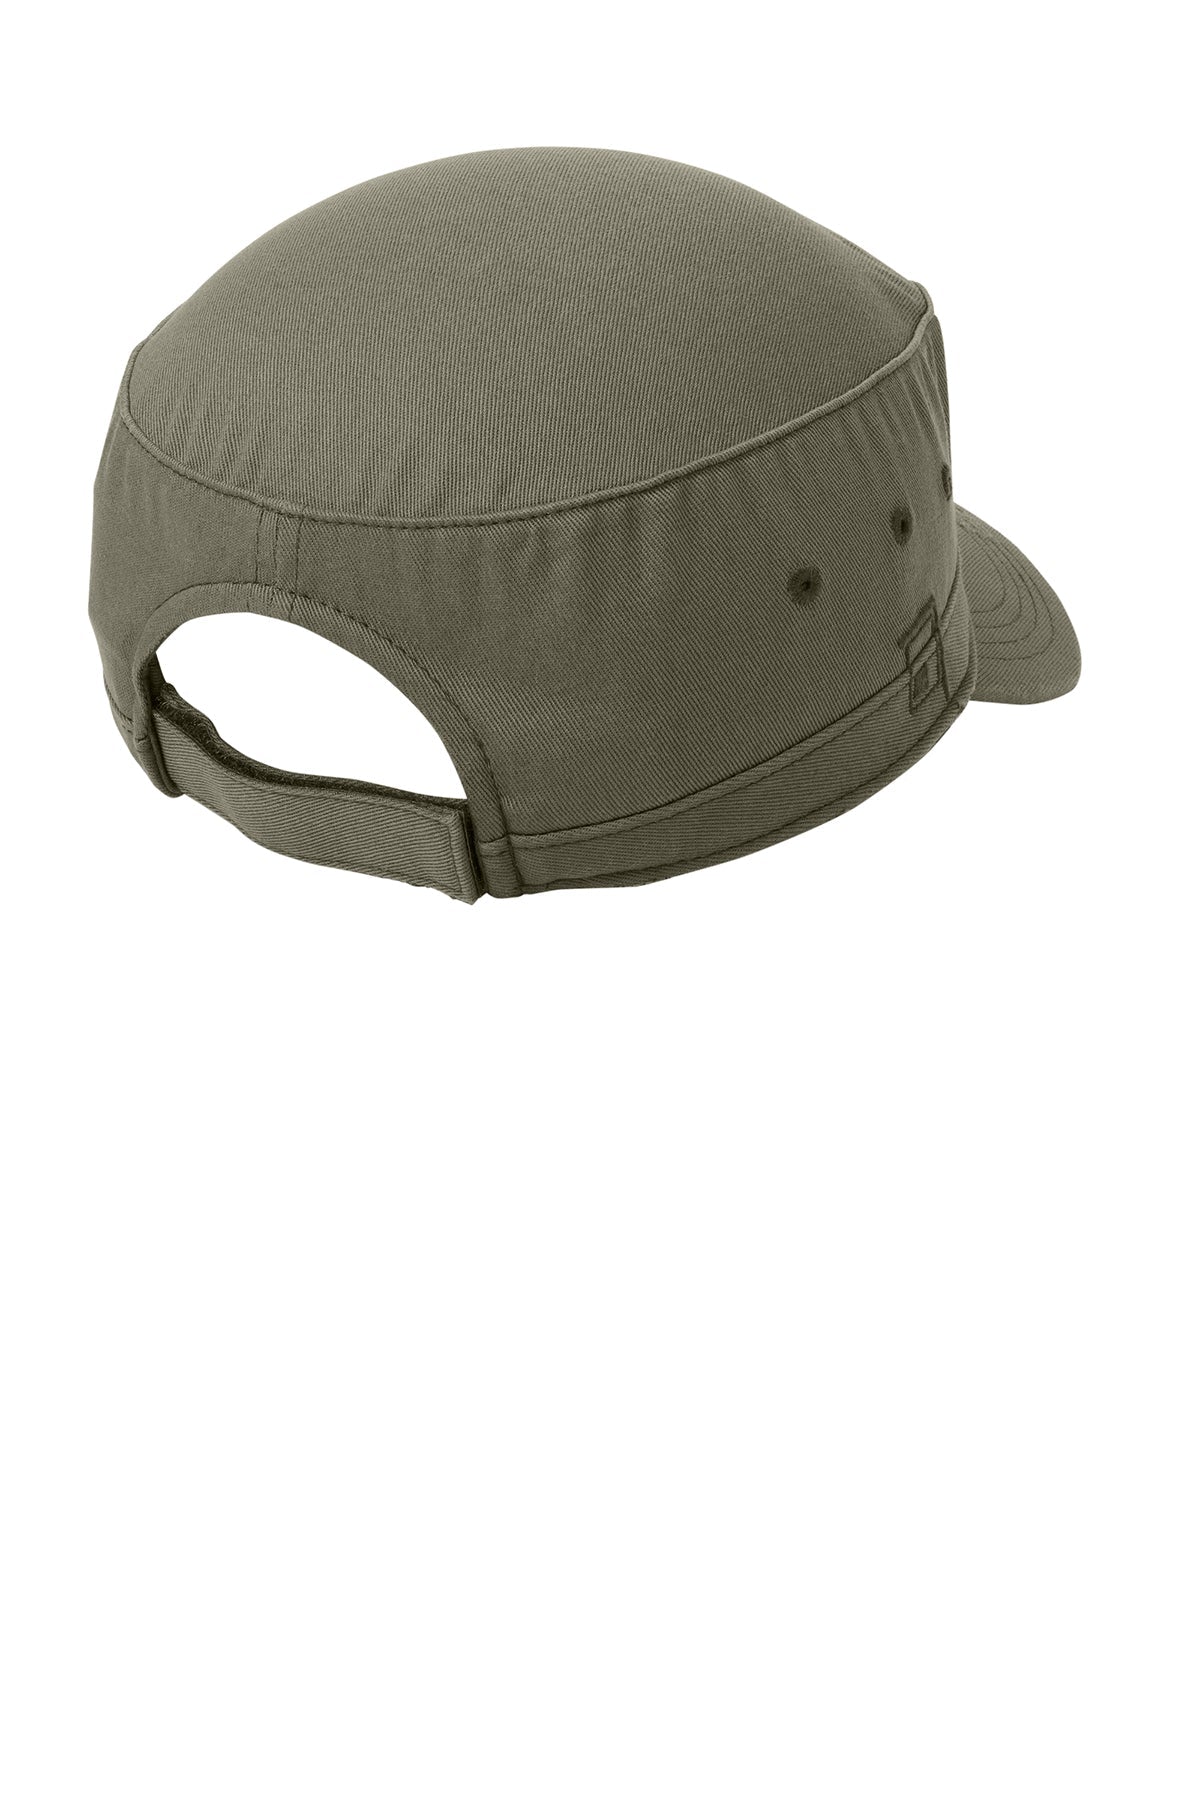 District Distressed Military Hats, Olive